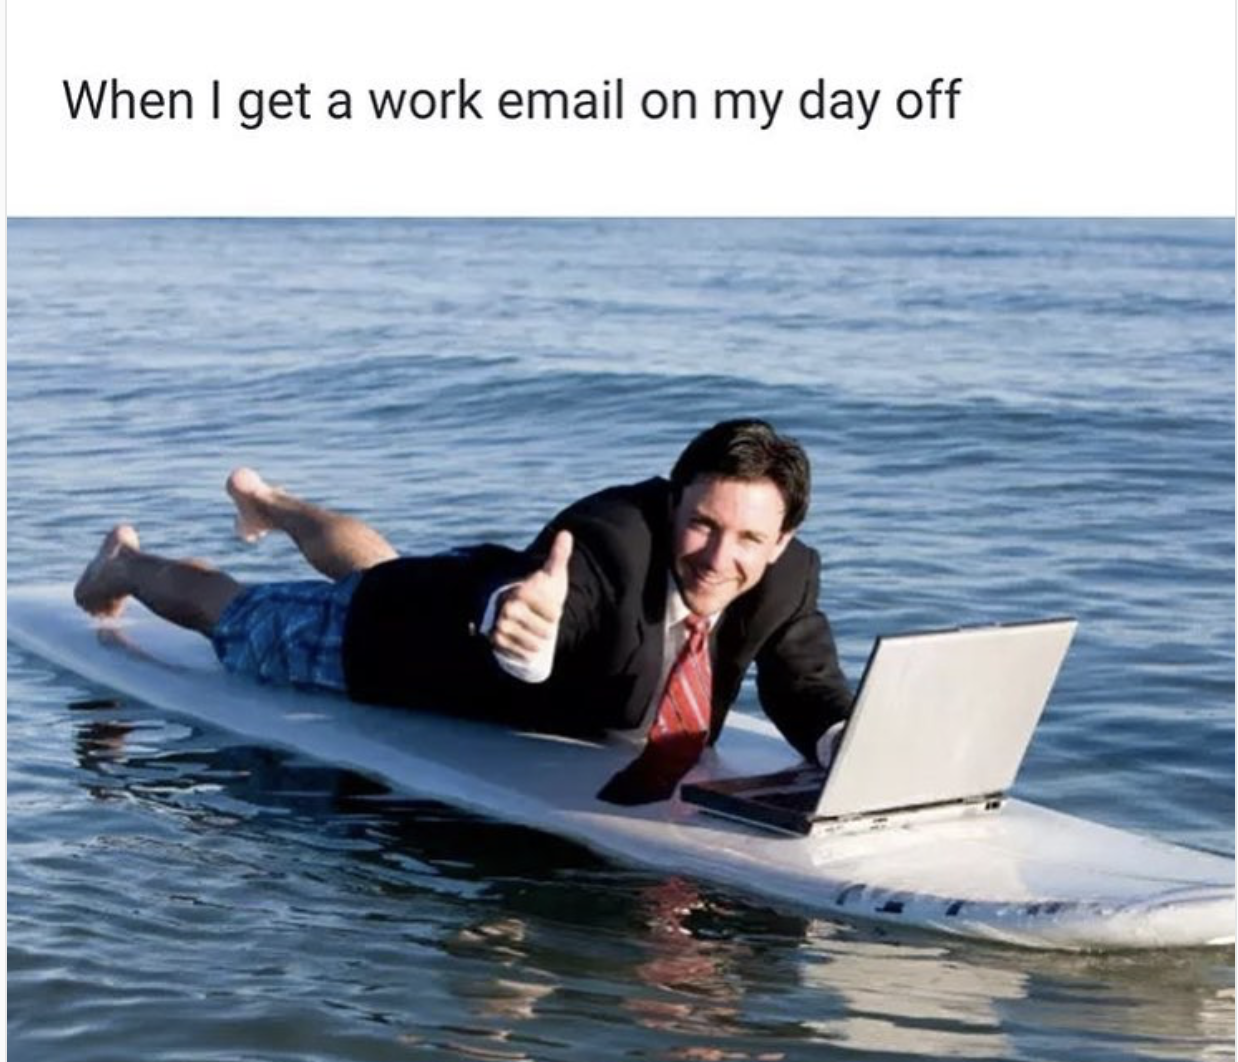 unexplainable stock - When I get a work email on my day off